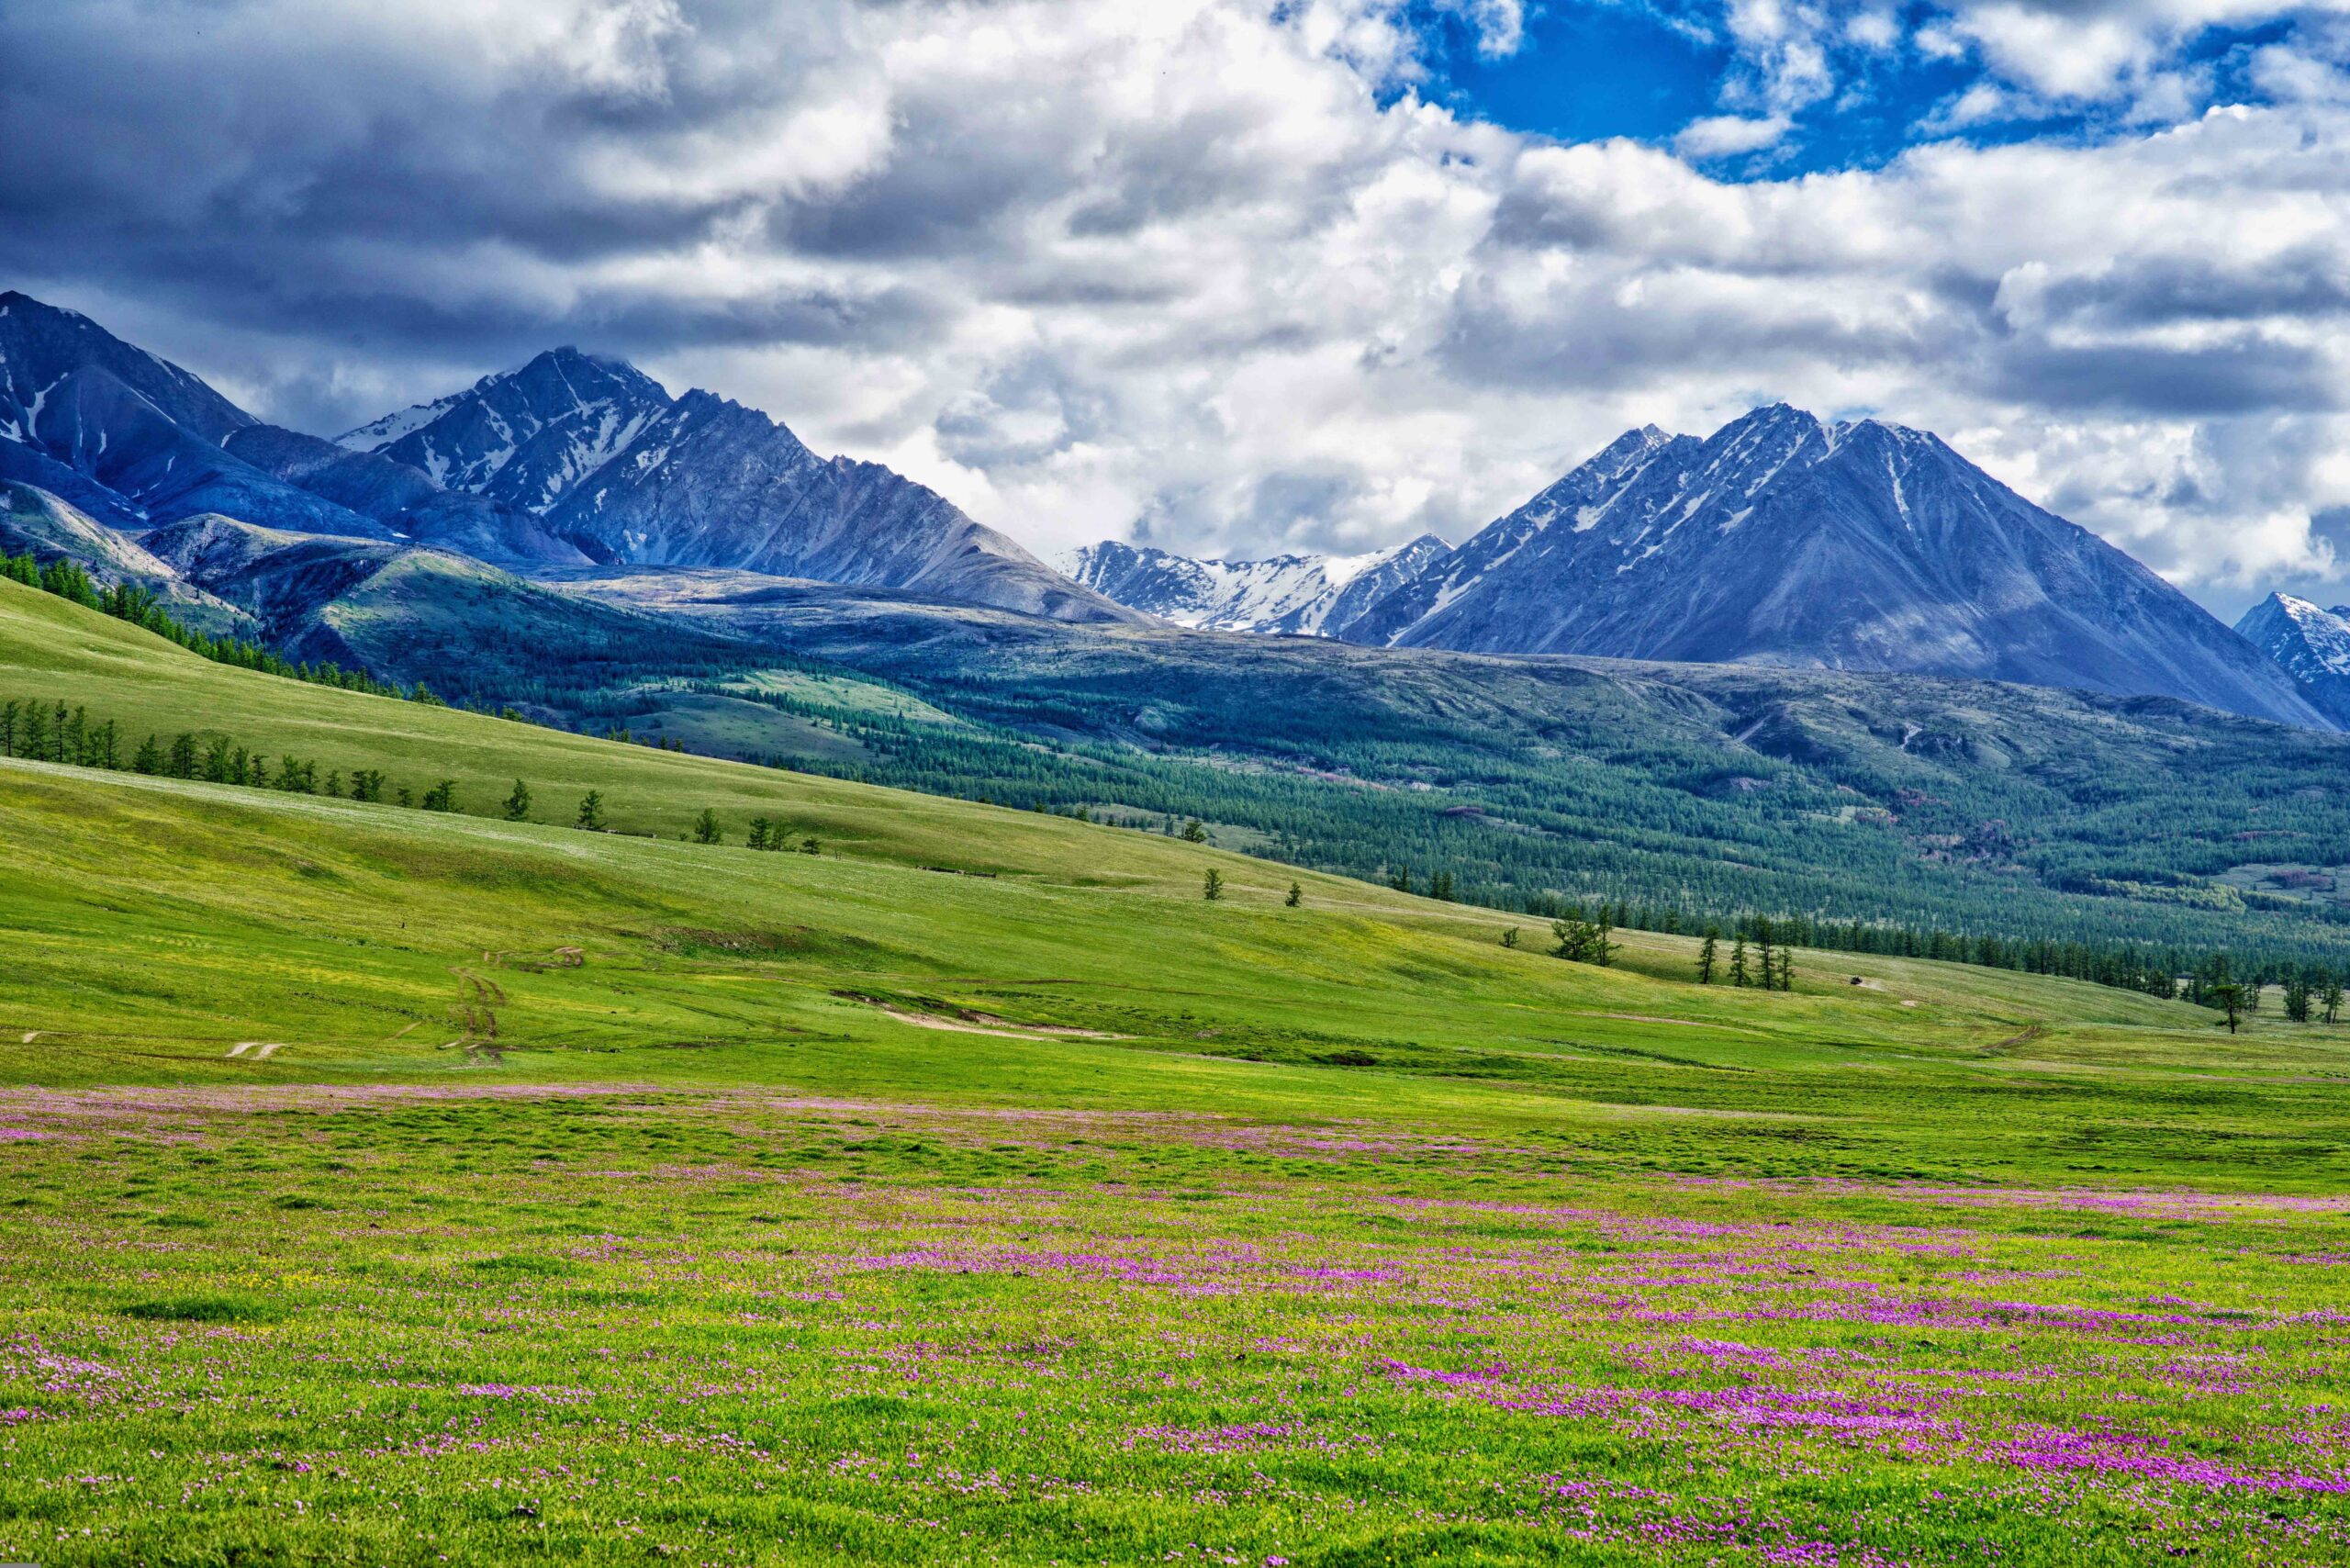 The 8 best National parks and Nature Reserves in Mongolia!